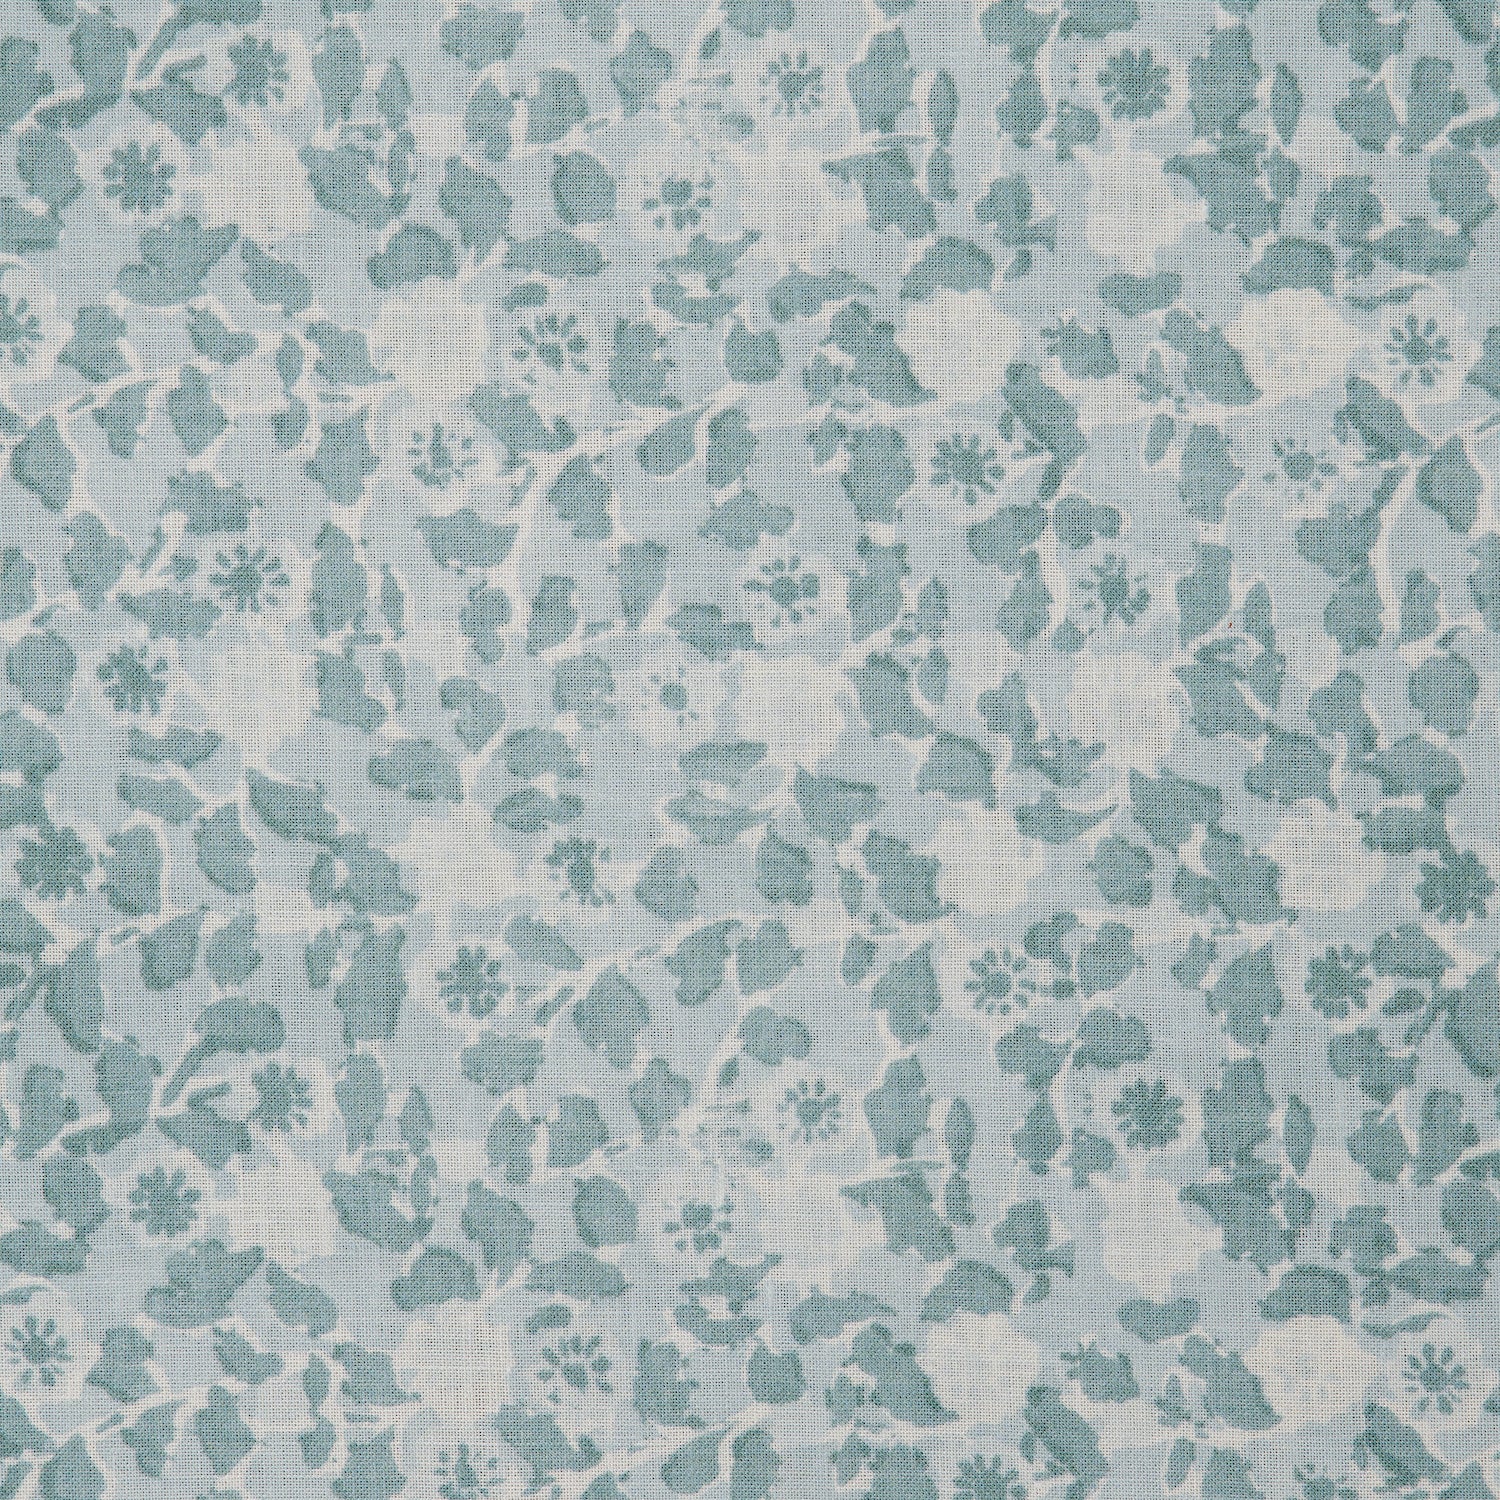 Detail of a linen fabric in a painterly floral pattern in shades of blue on a cream field.